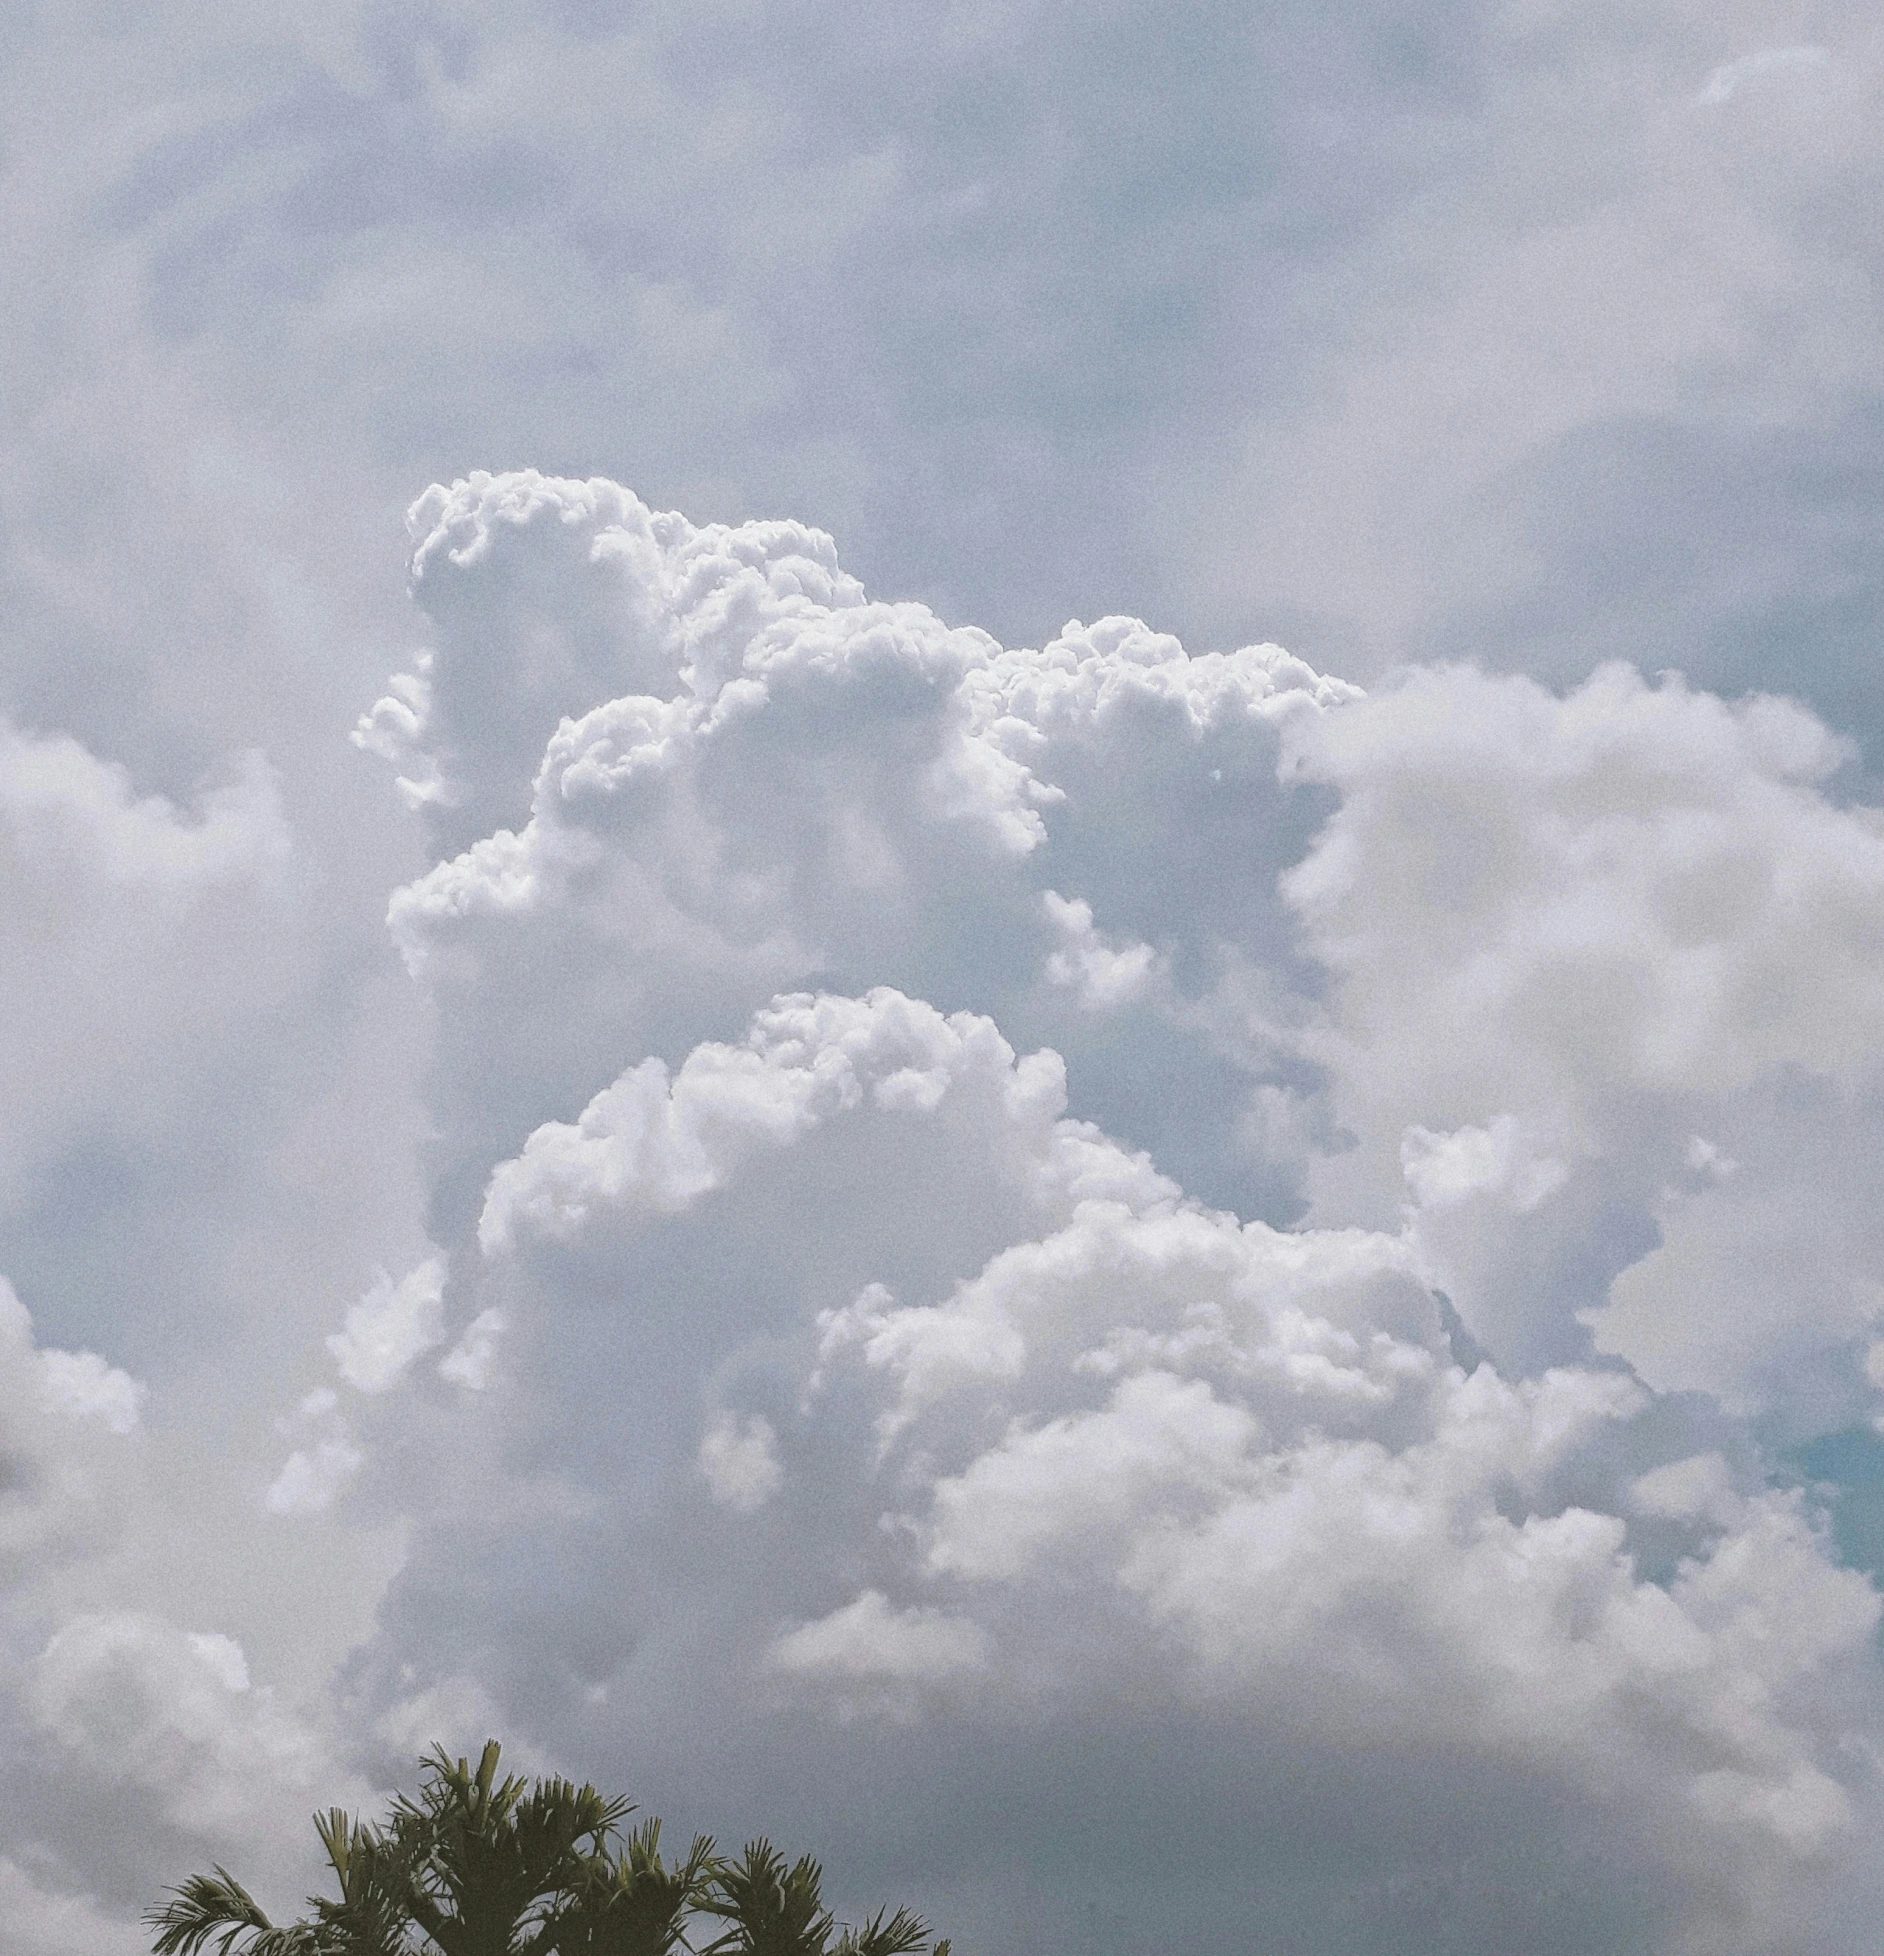 a person looking up at a large cloud filled sky